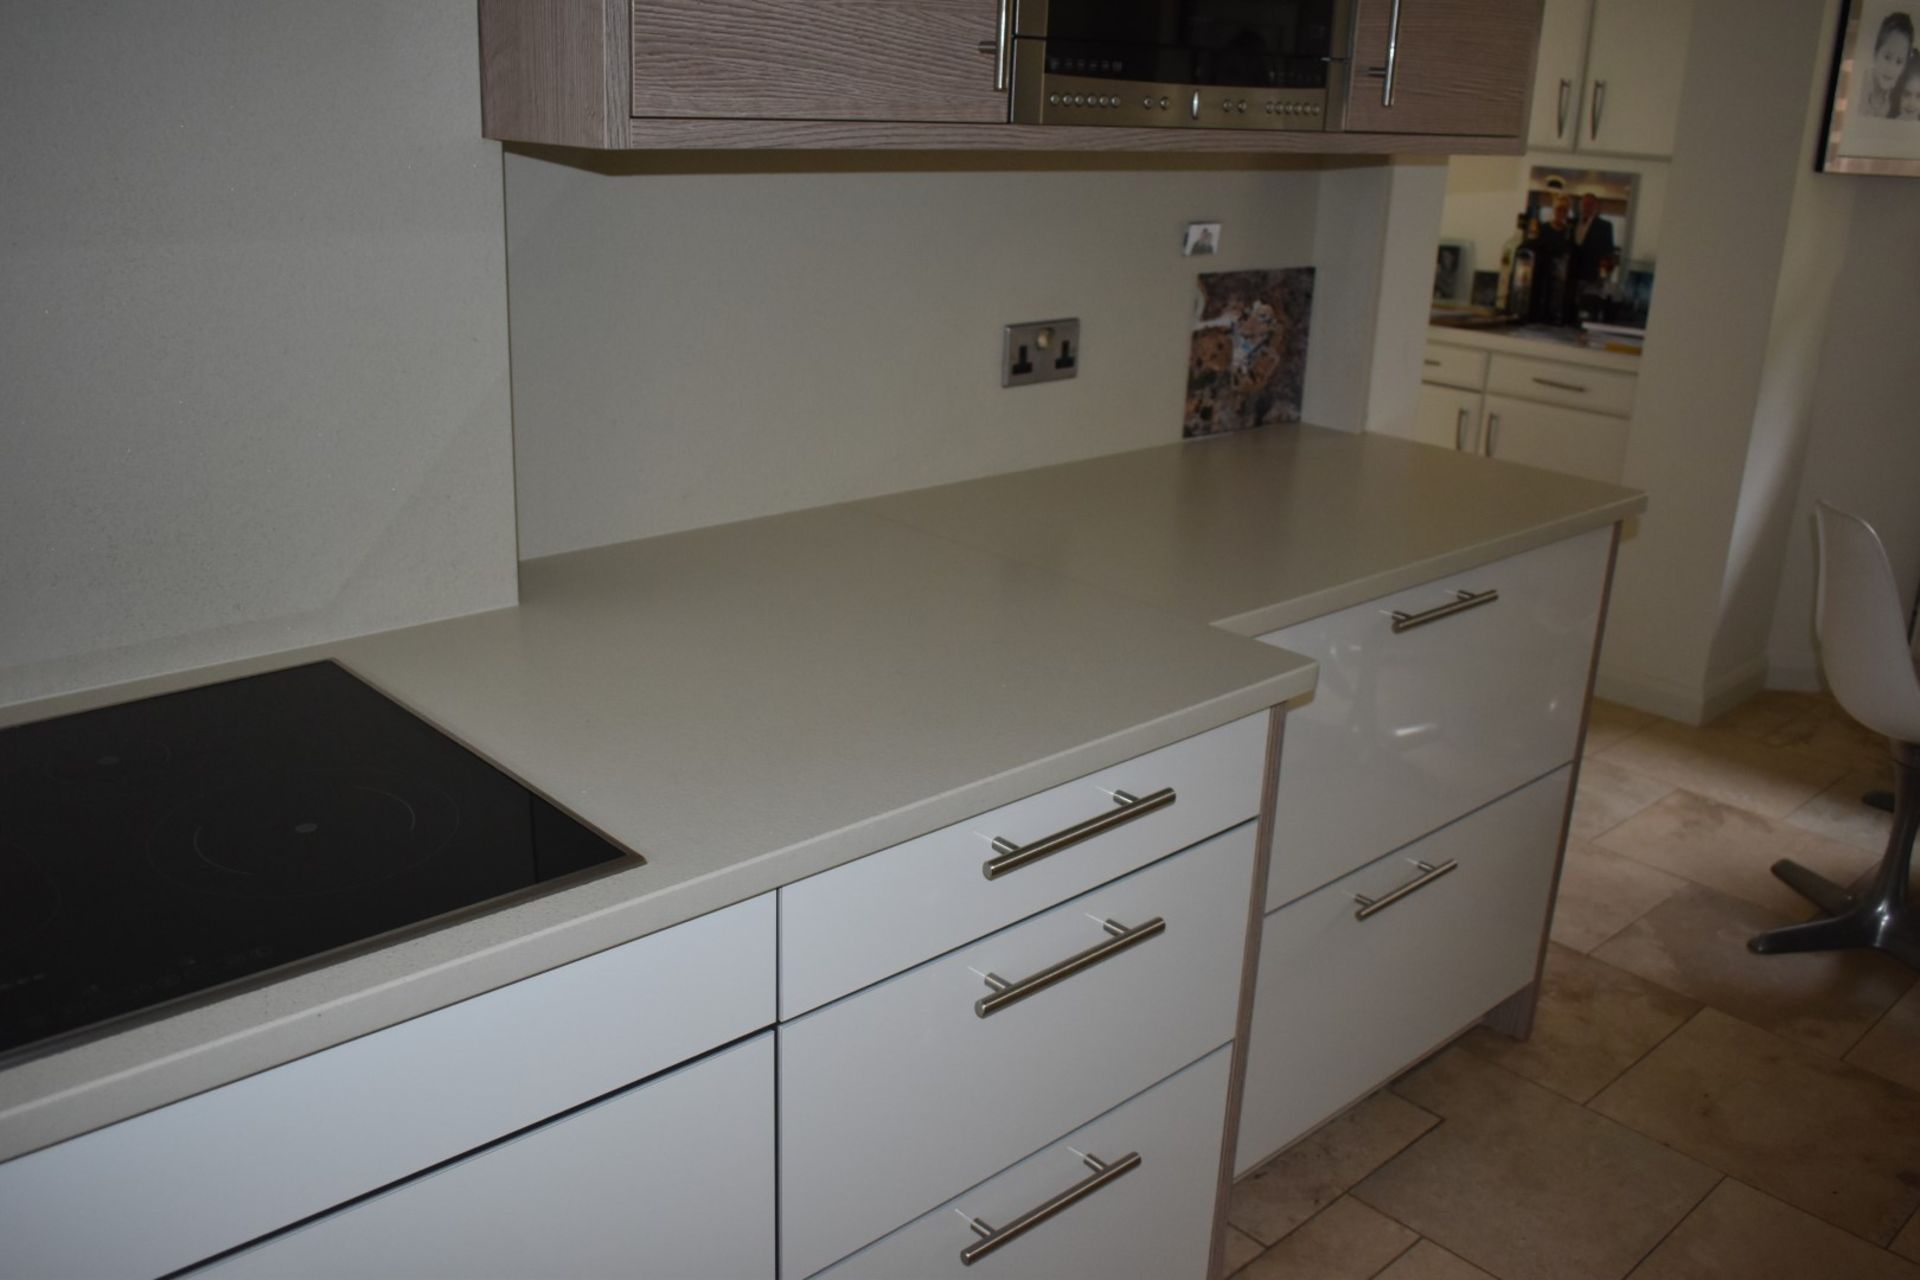 1 x Pronorm Einbauküchen German Made Fitted Kitchen With Contemporary High Gloss Cream Doors and - Image 25 of 50